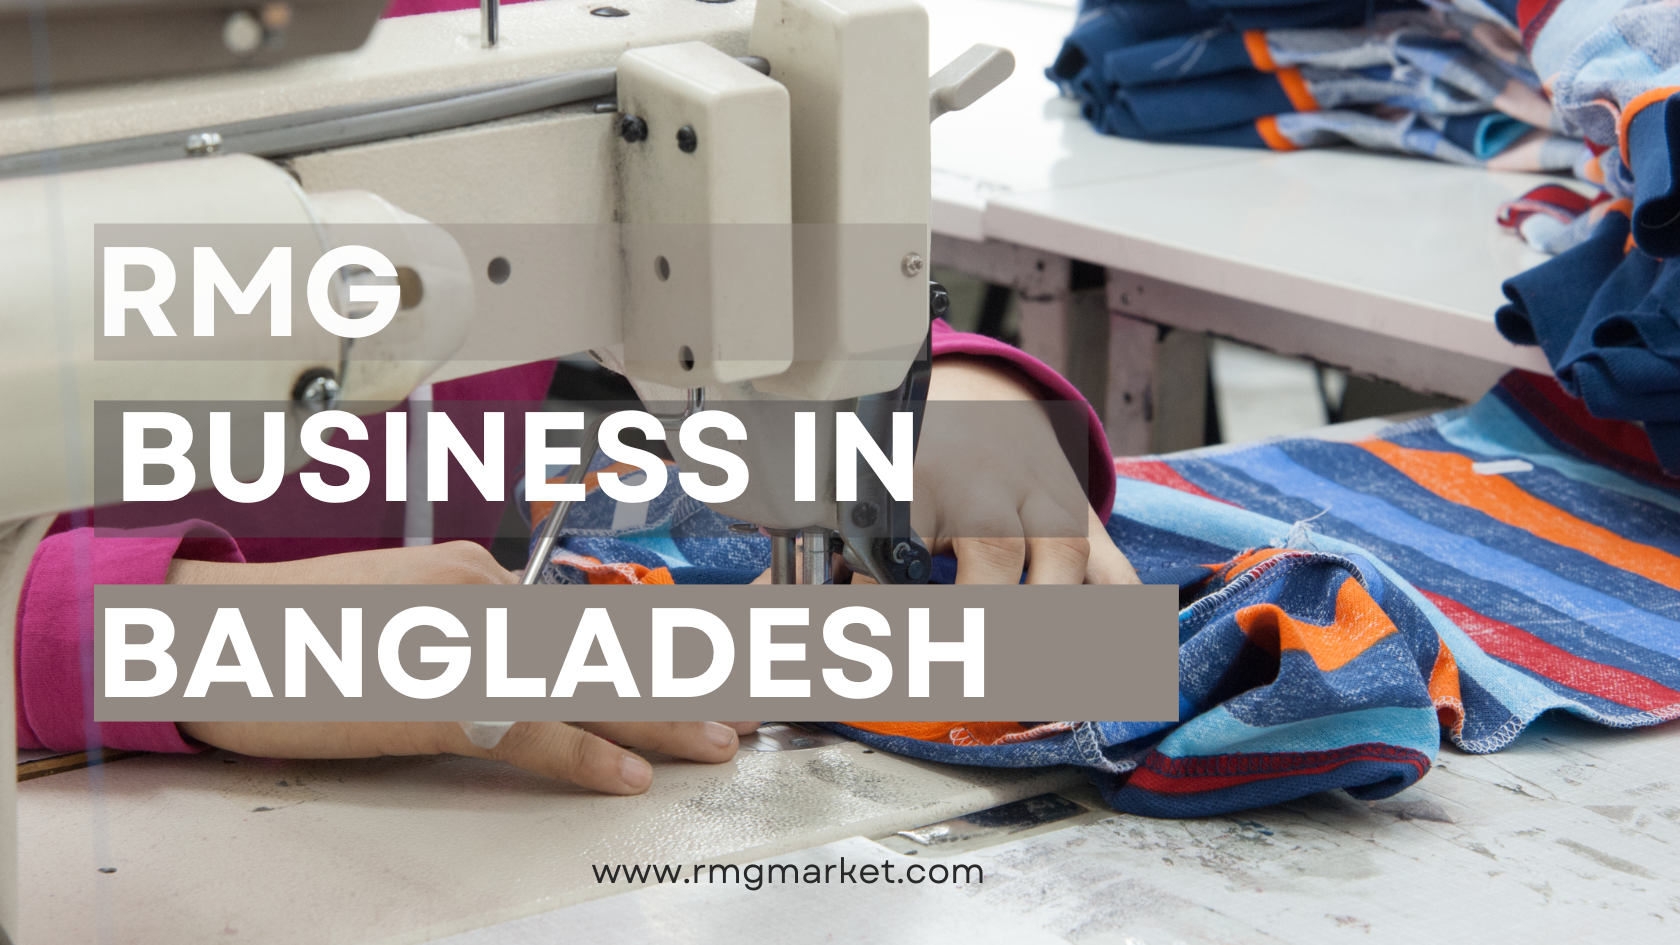 How to Setup Ready Made Garments (RMG) Business in Bangladesh